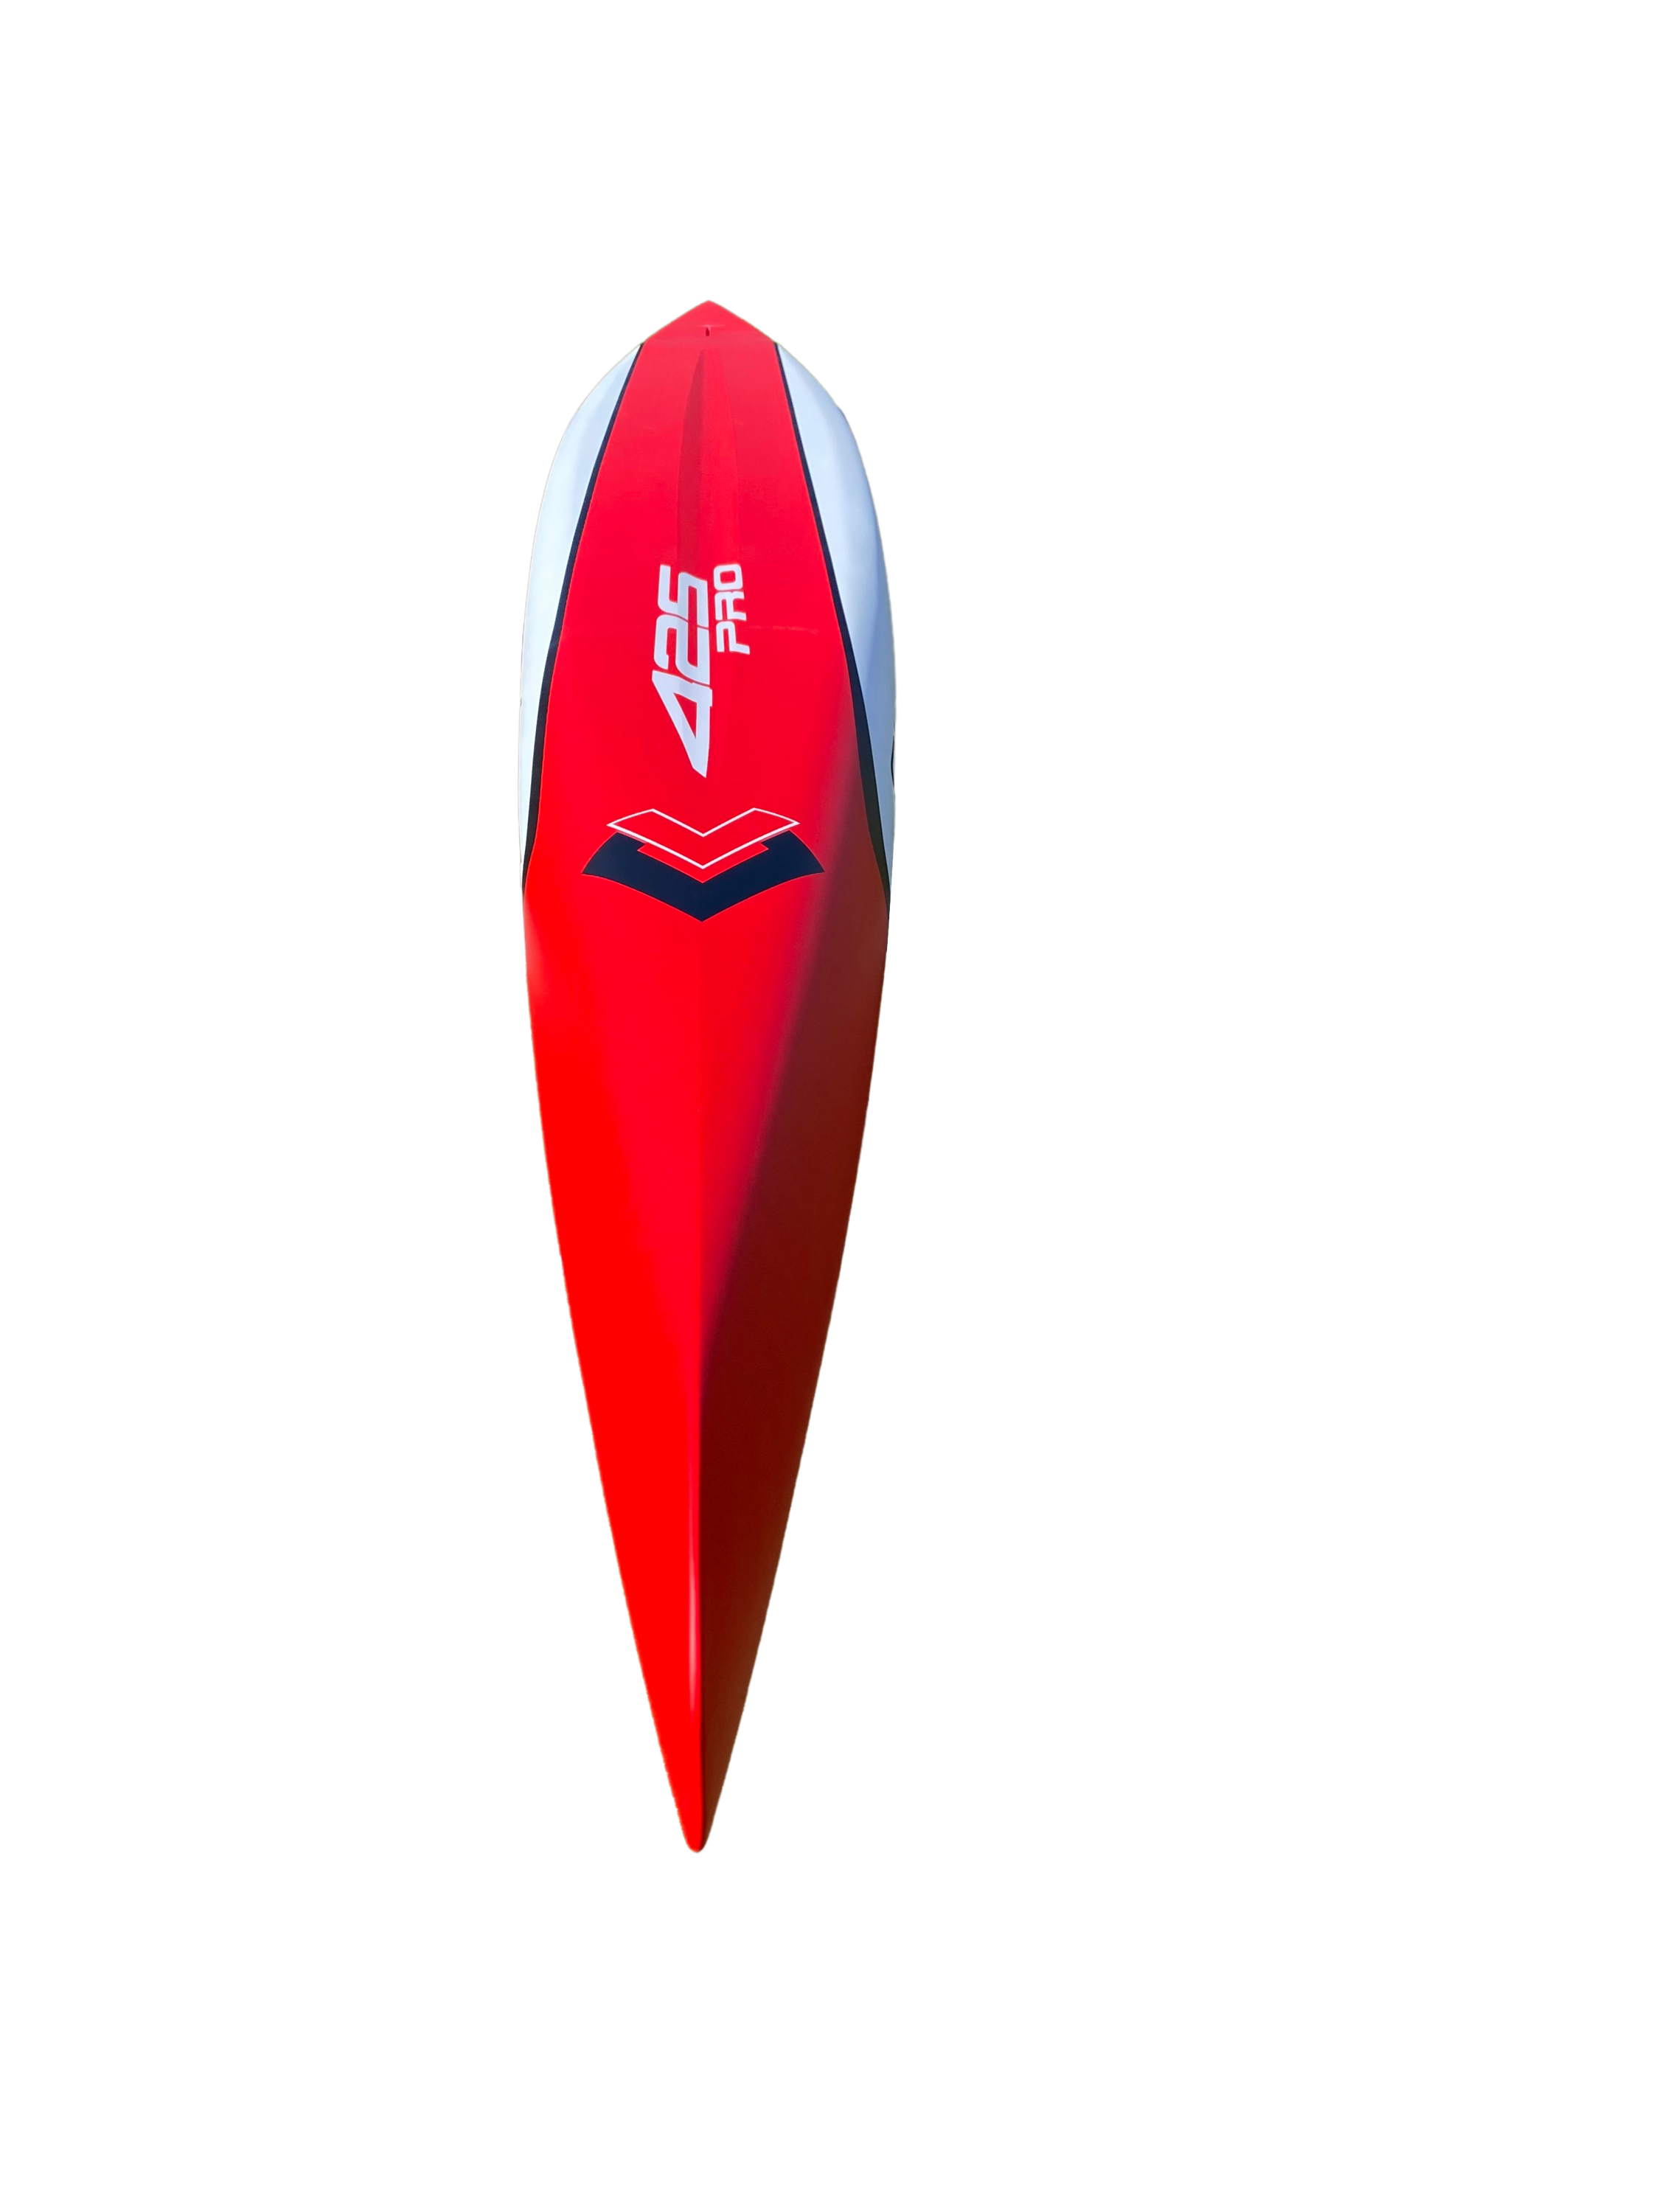 425pro board: front view, red and white, pointy nose